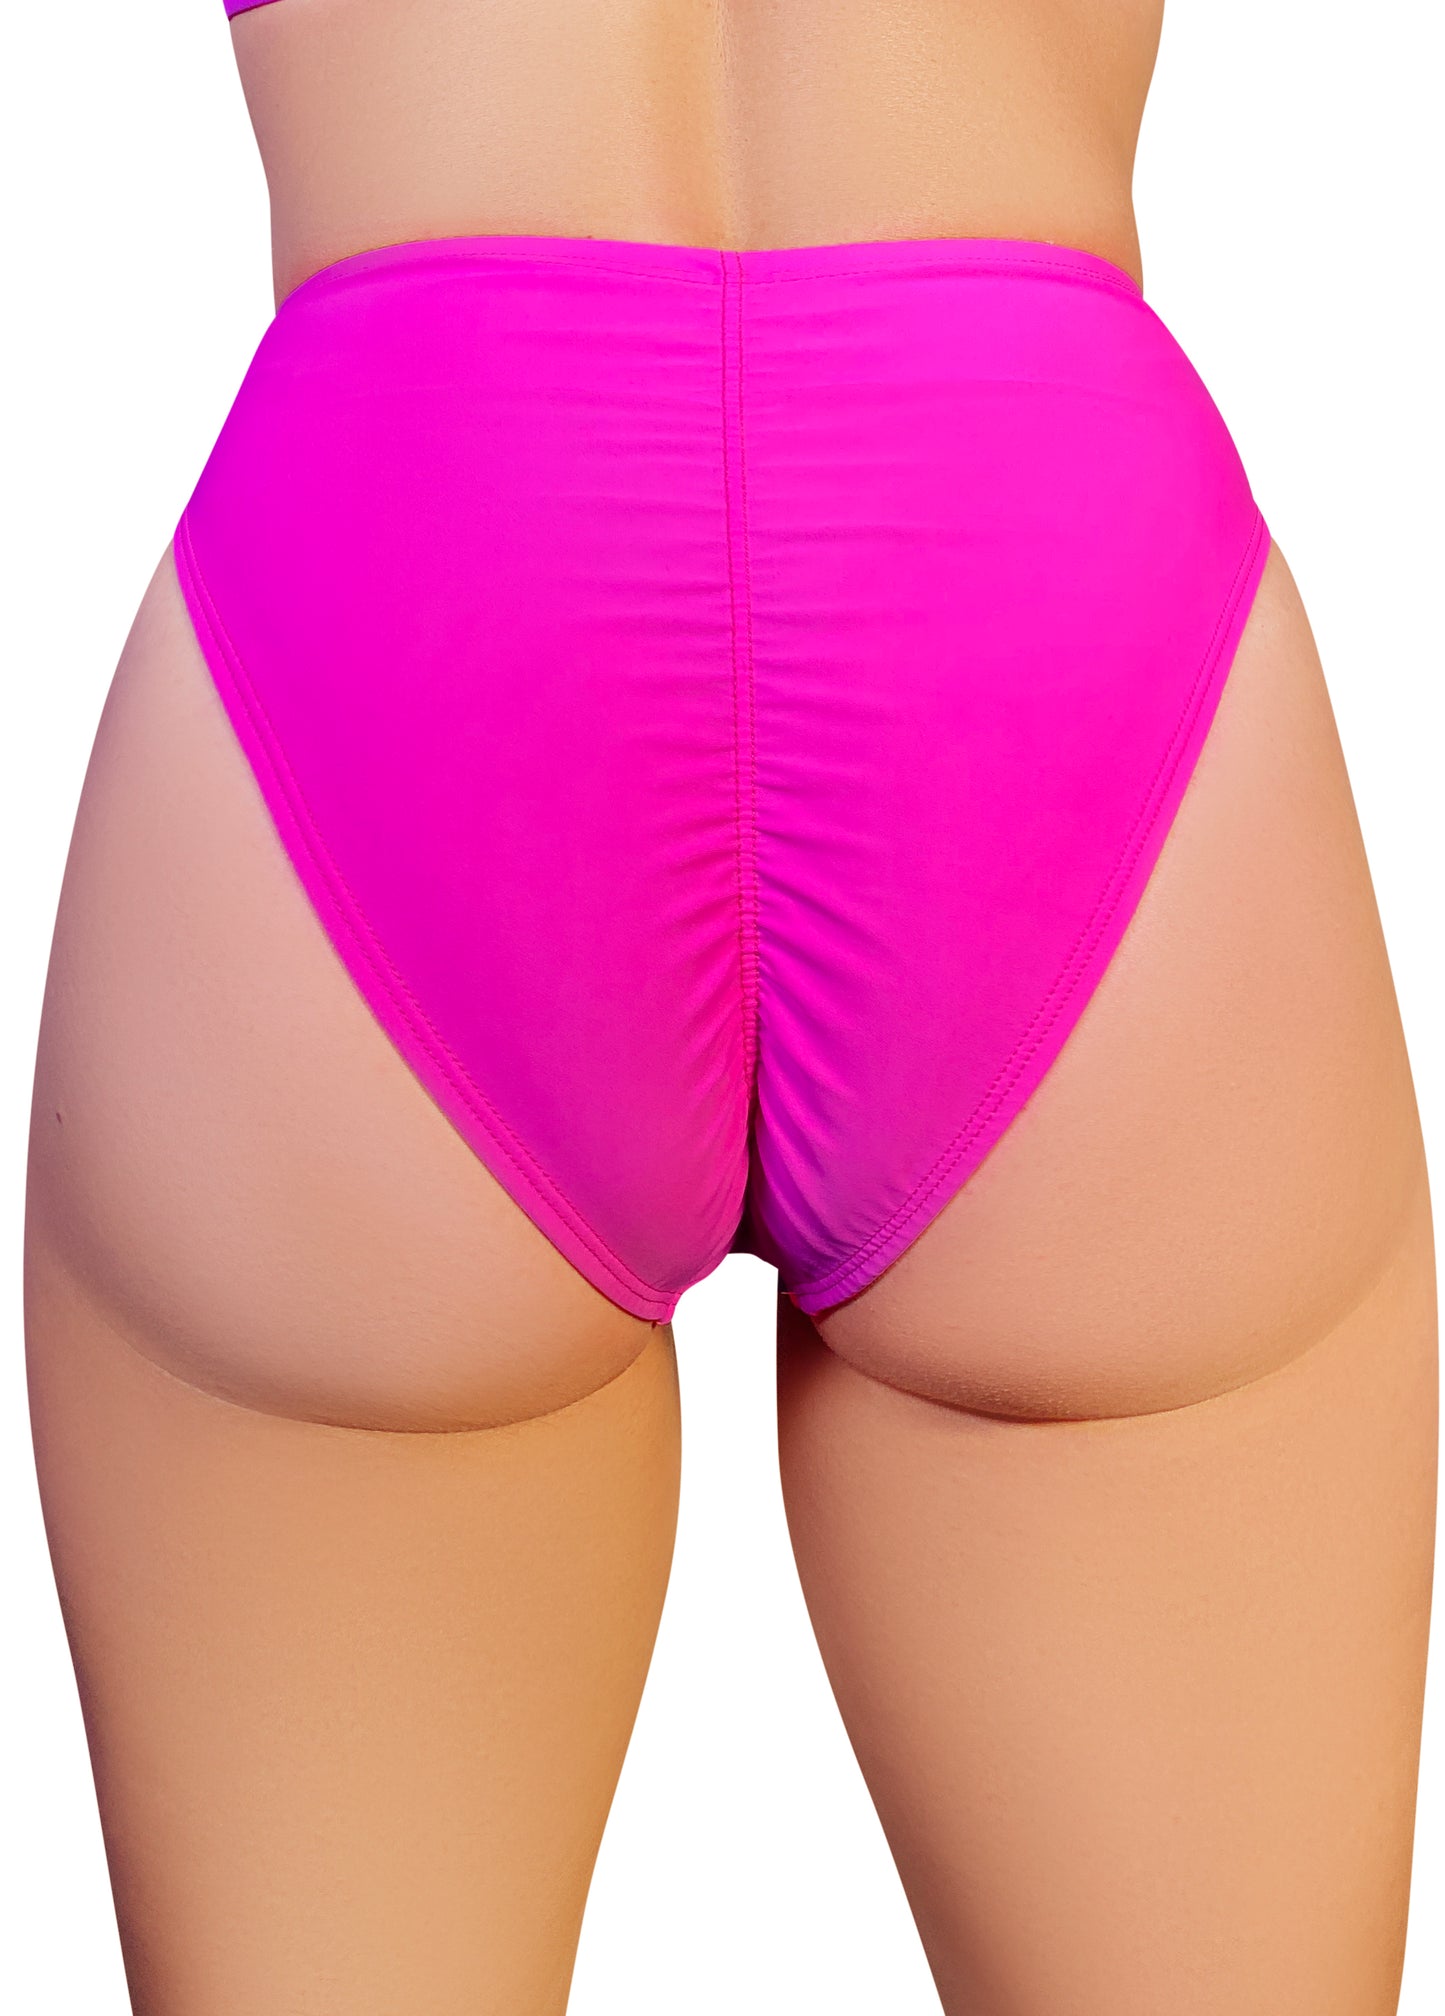 Essential High Rider Hot Pants